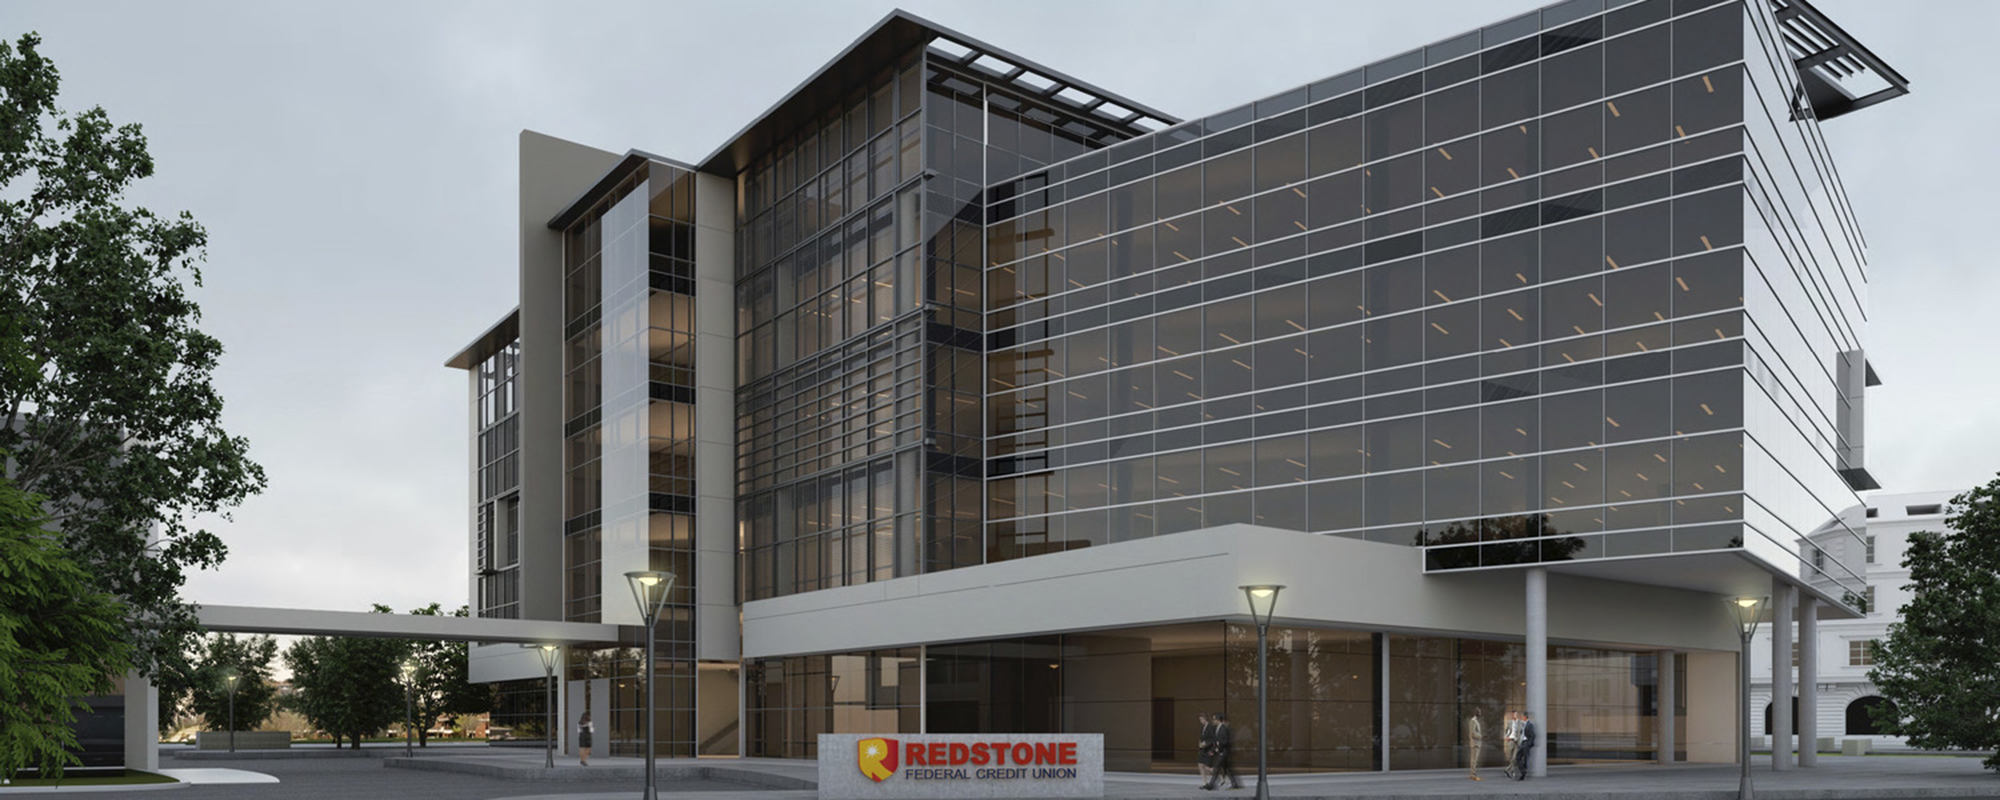 Redstone Federal Credit Union rendering